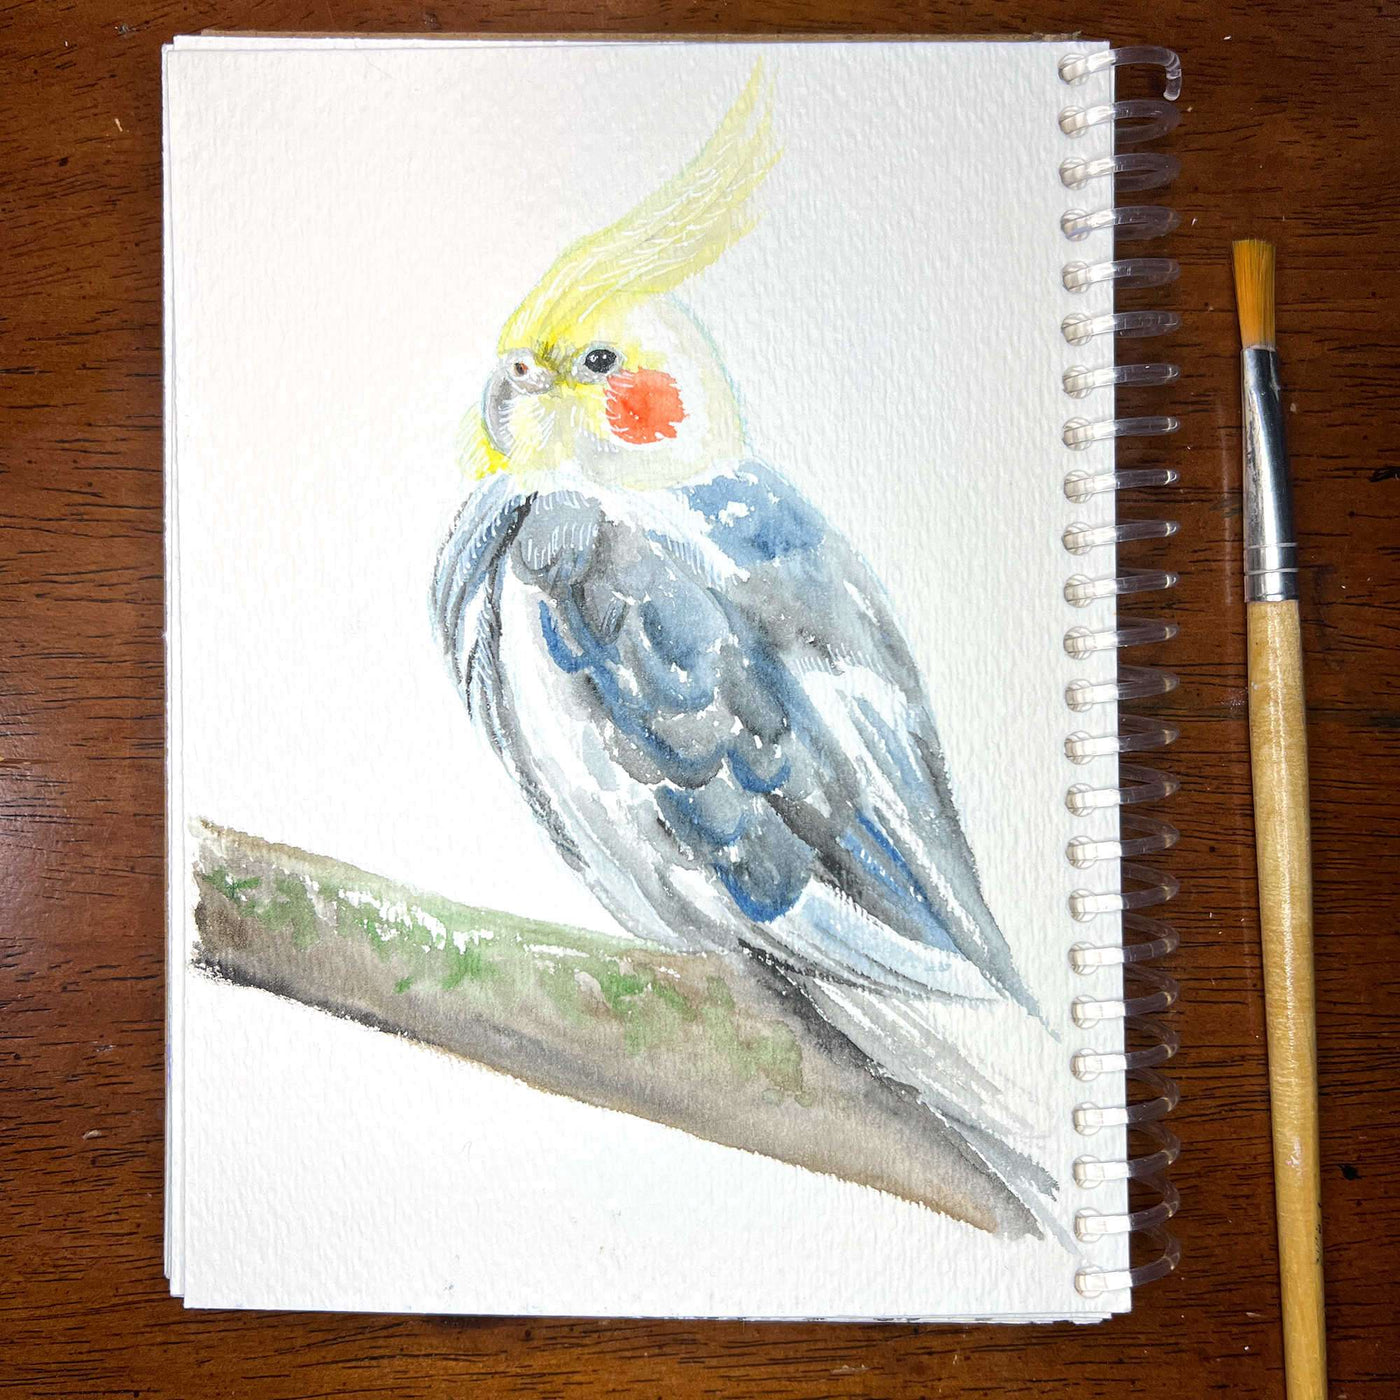 Cockatiel watercolor painting on a sketch pad with a brush beside it.